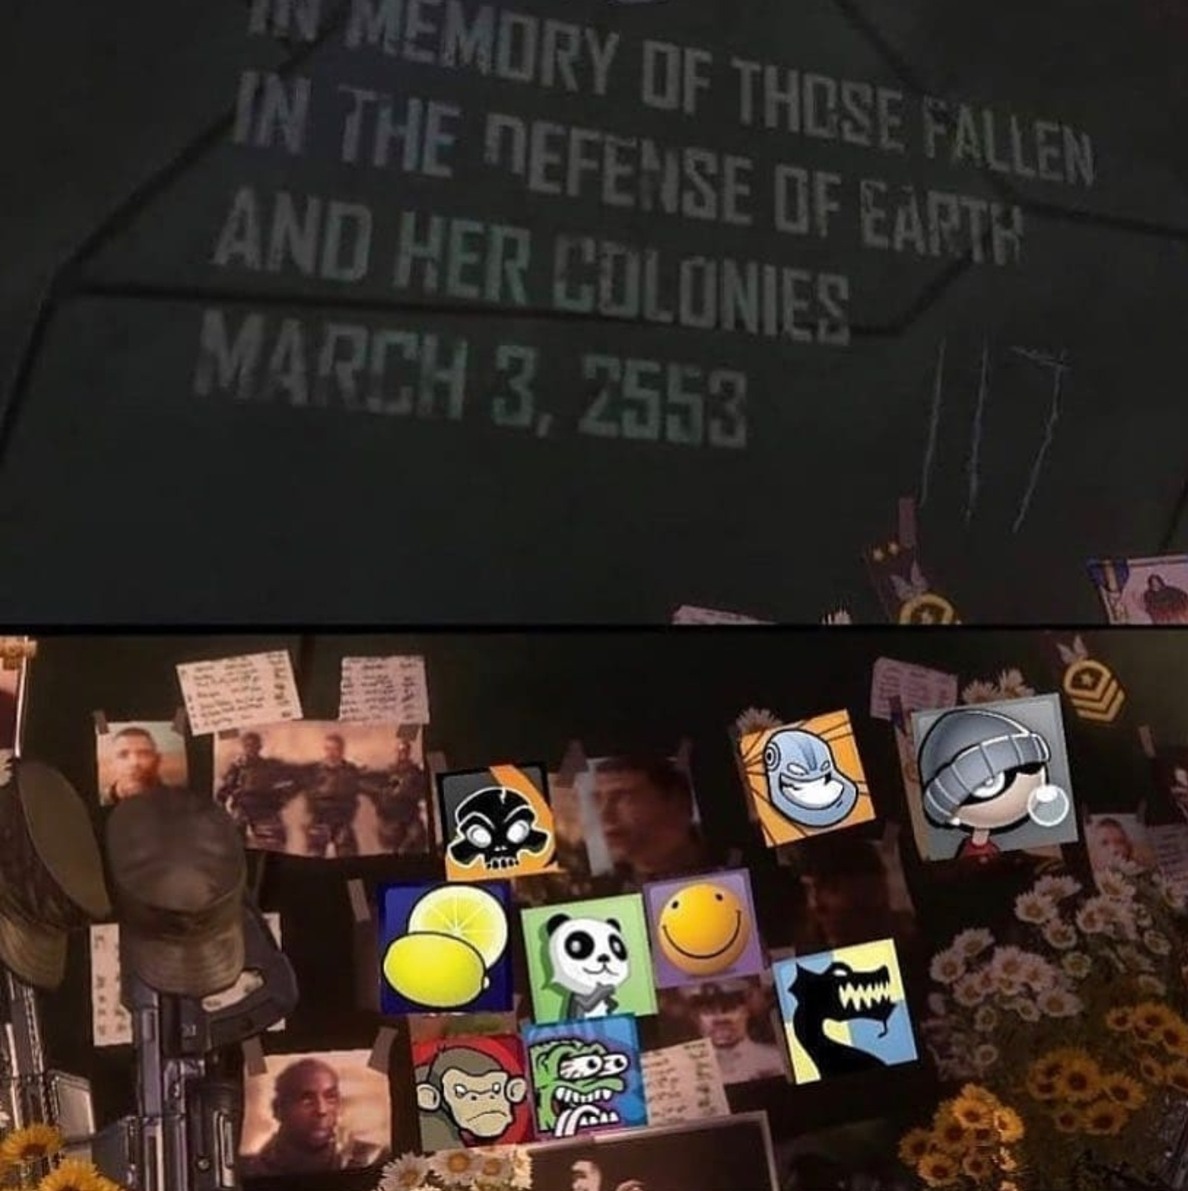 press F to pay respects - Meme by Naturalbadger52 :) Memedroid